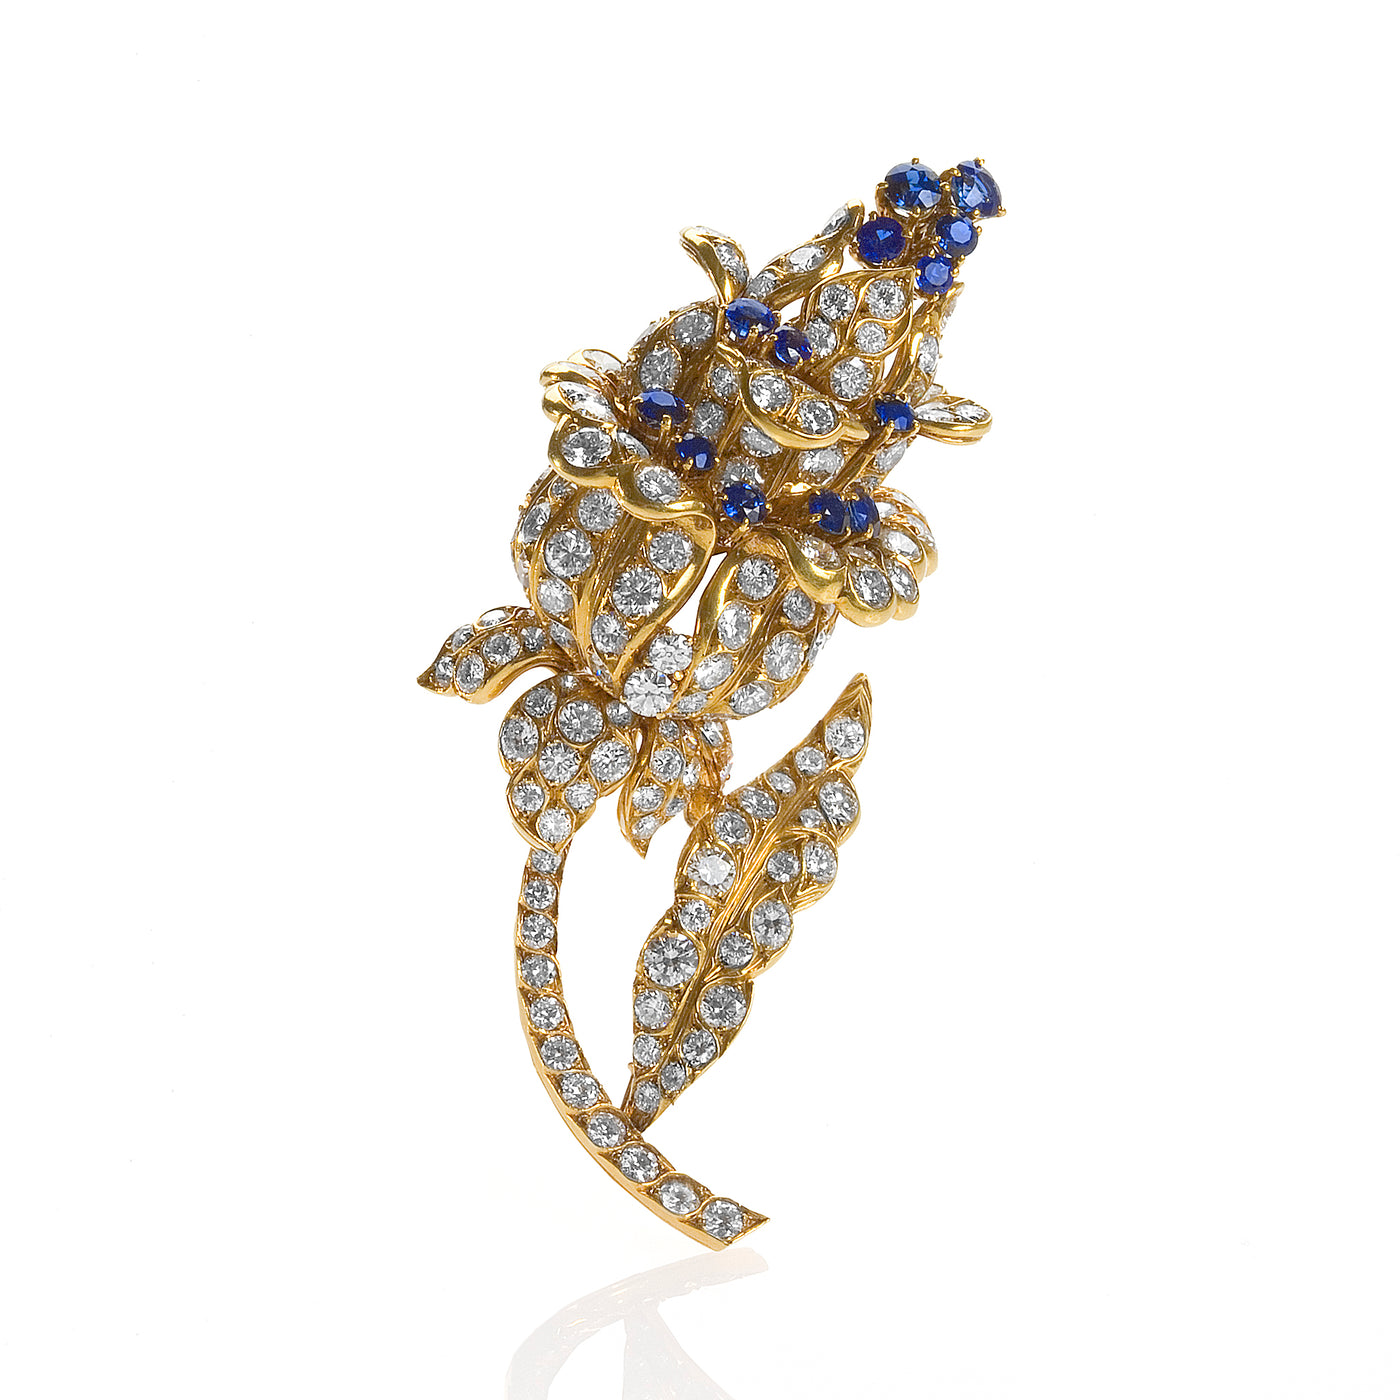 Macklowe Gallery | Lacloche Frères Diamond and Sapphire Flower Brooch ...